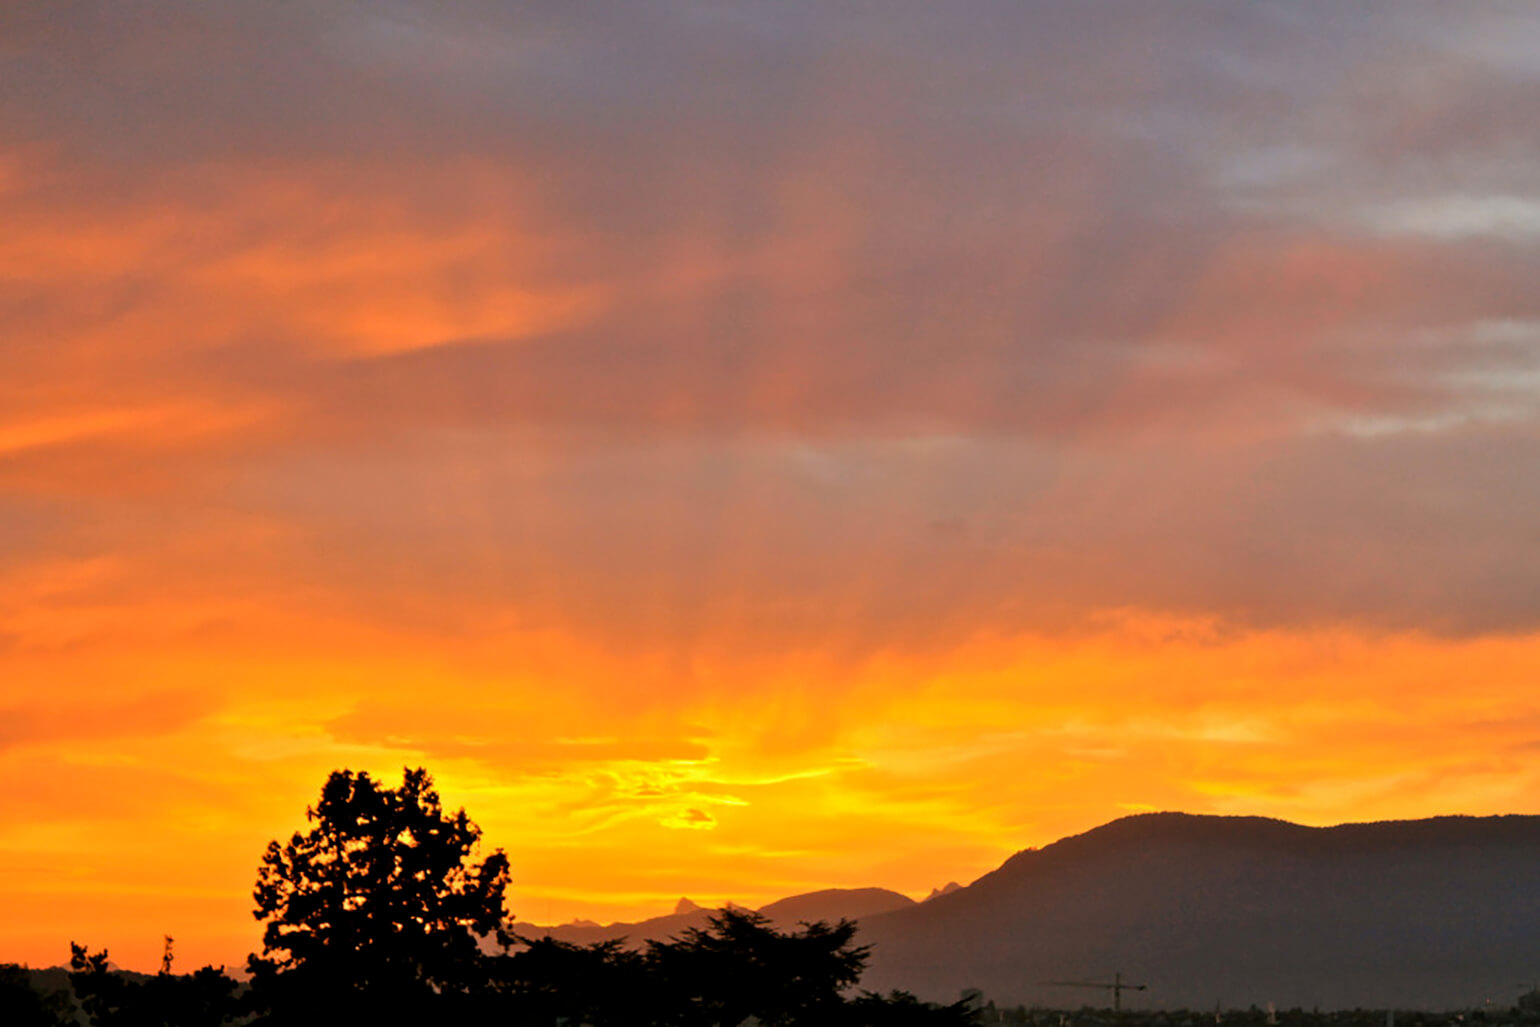 This is a photograph of an orange and pink and gray sunrise in the sky, over some mountains and treetops that are still in shadow.